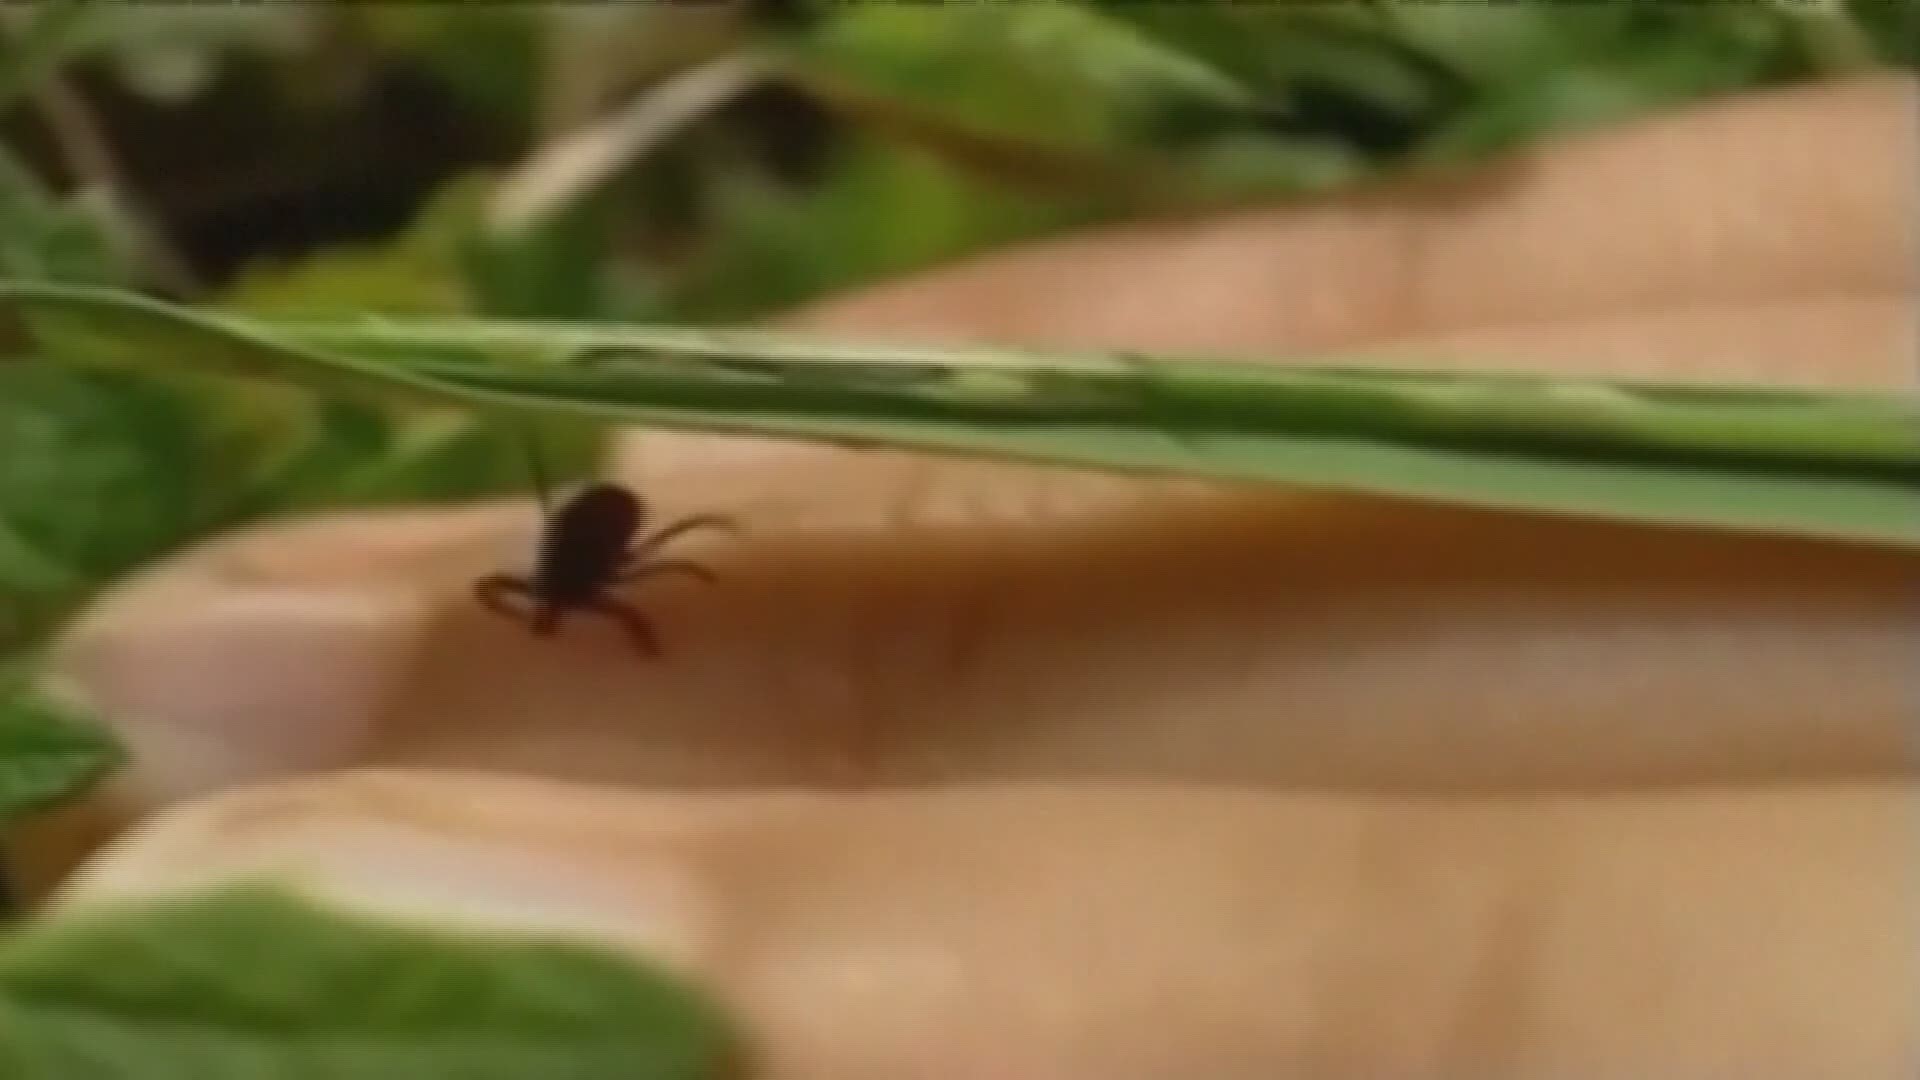 The Missouri Department of Conservation and A.T. Still University in Kirksville have partnered in a two-year research study on ticks